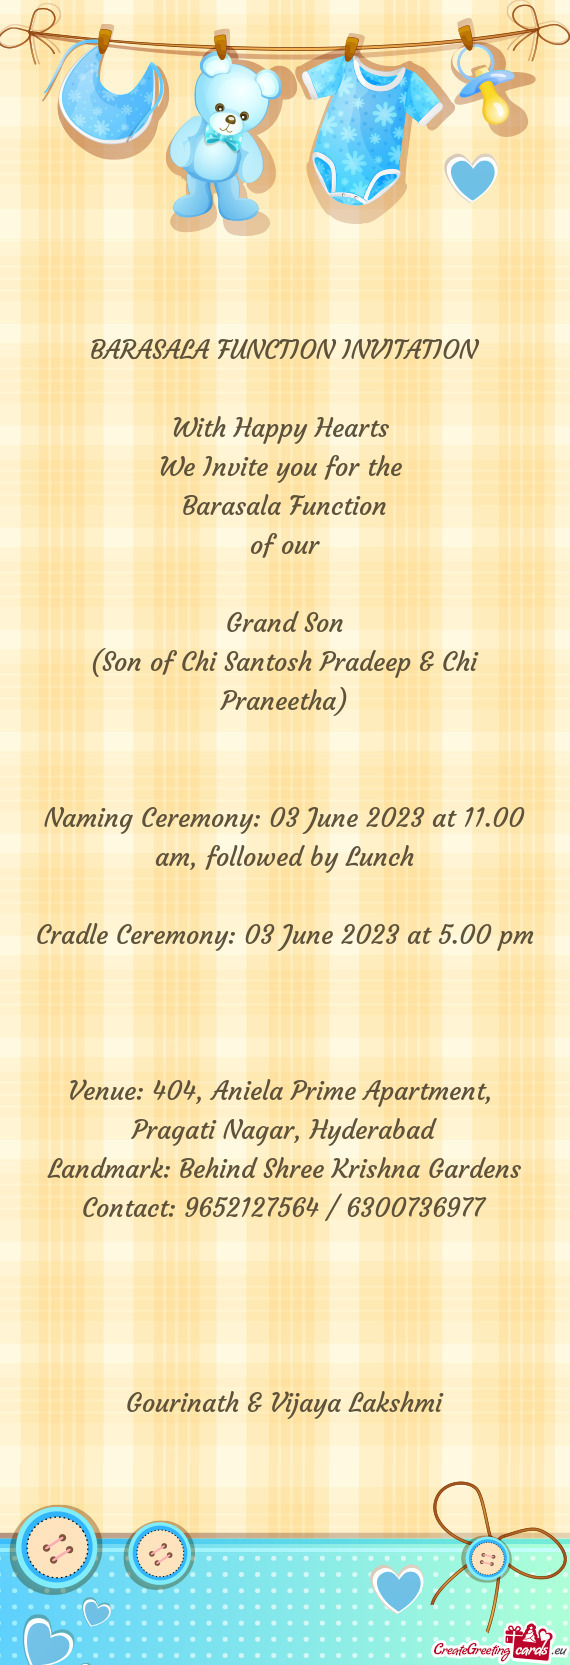 Naming Ceremony: 03 June 2023 at 11.00 am, followed by Lunch